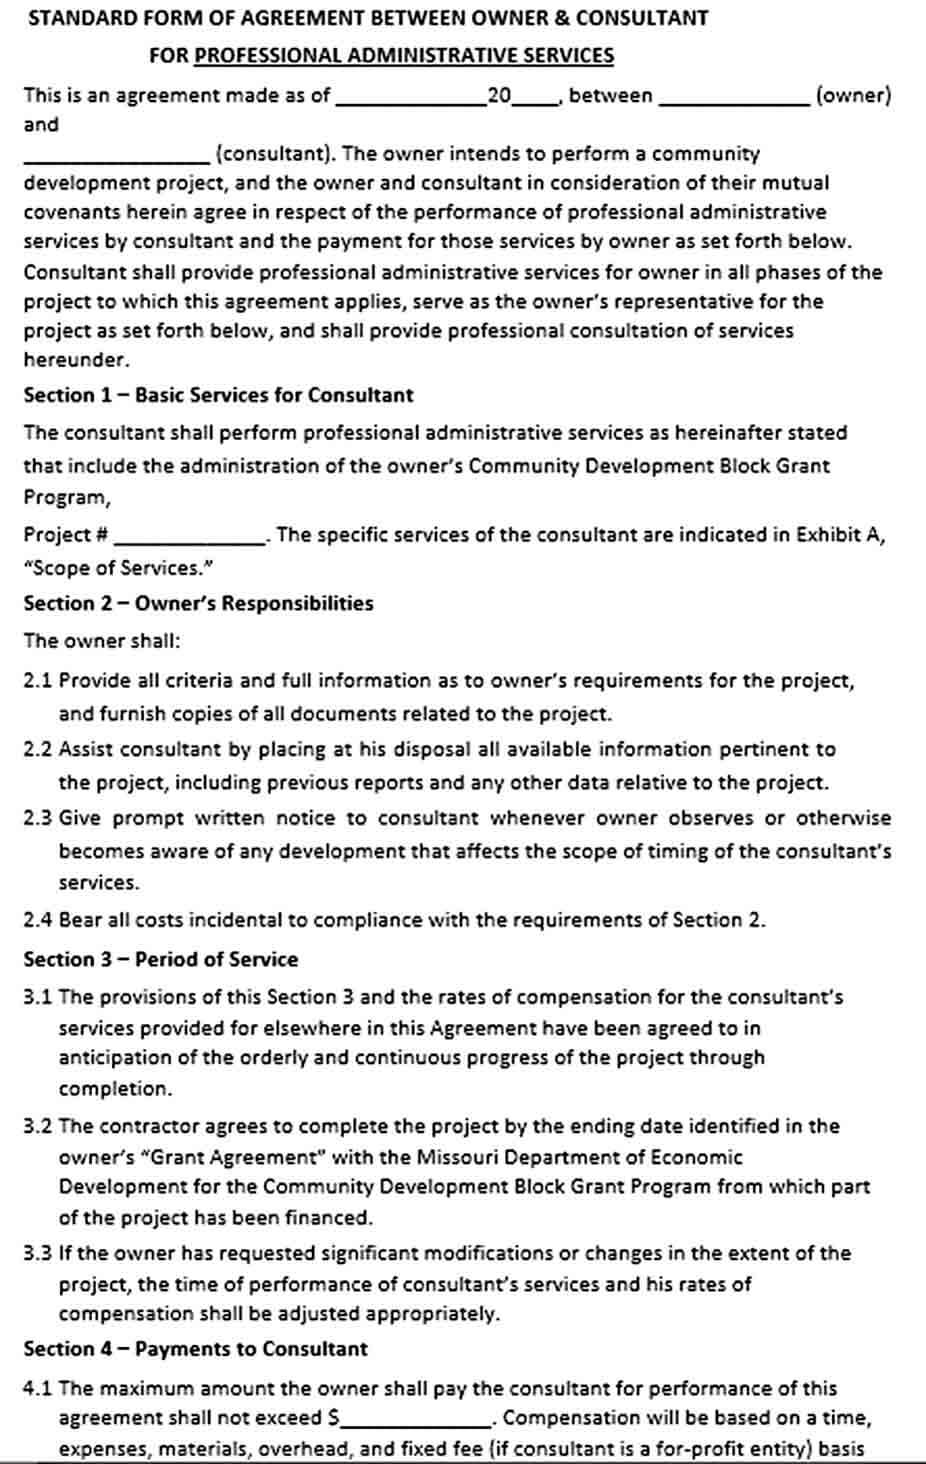 Professional Administrative Services Agreement Template